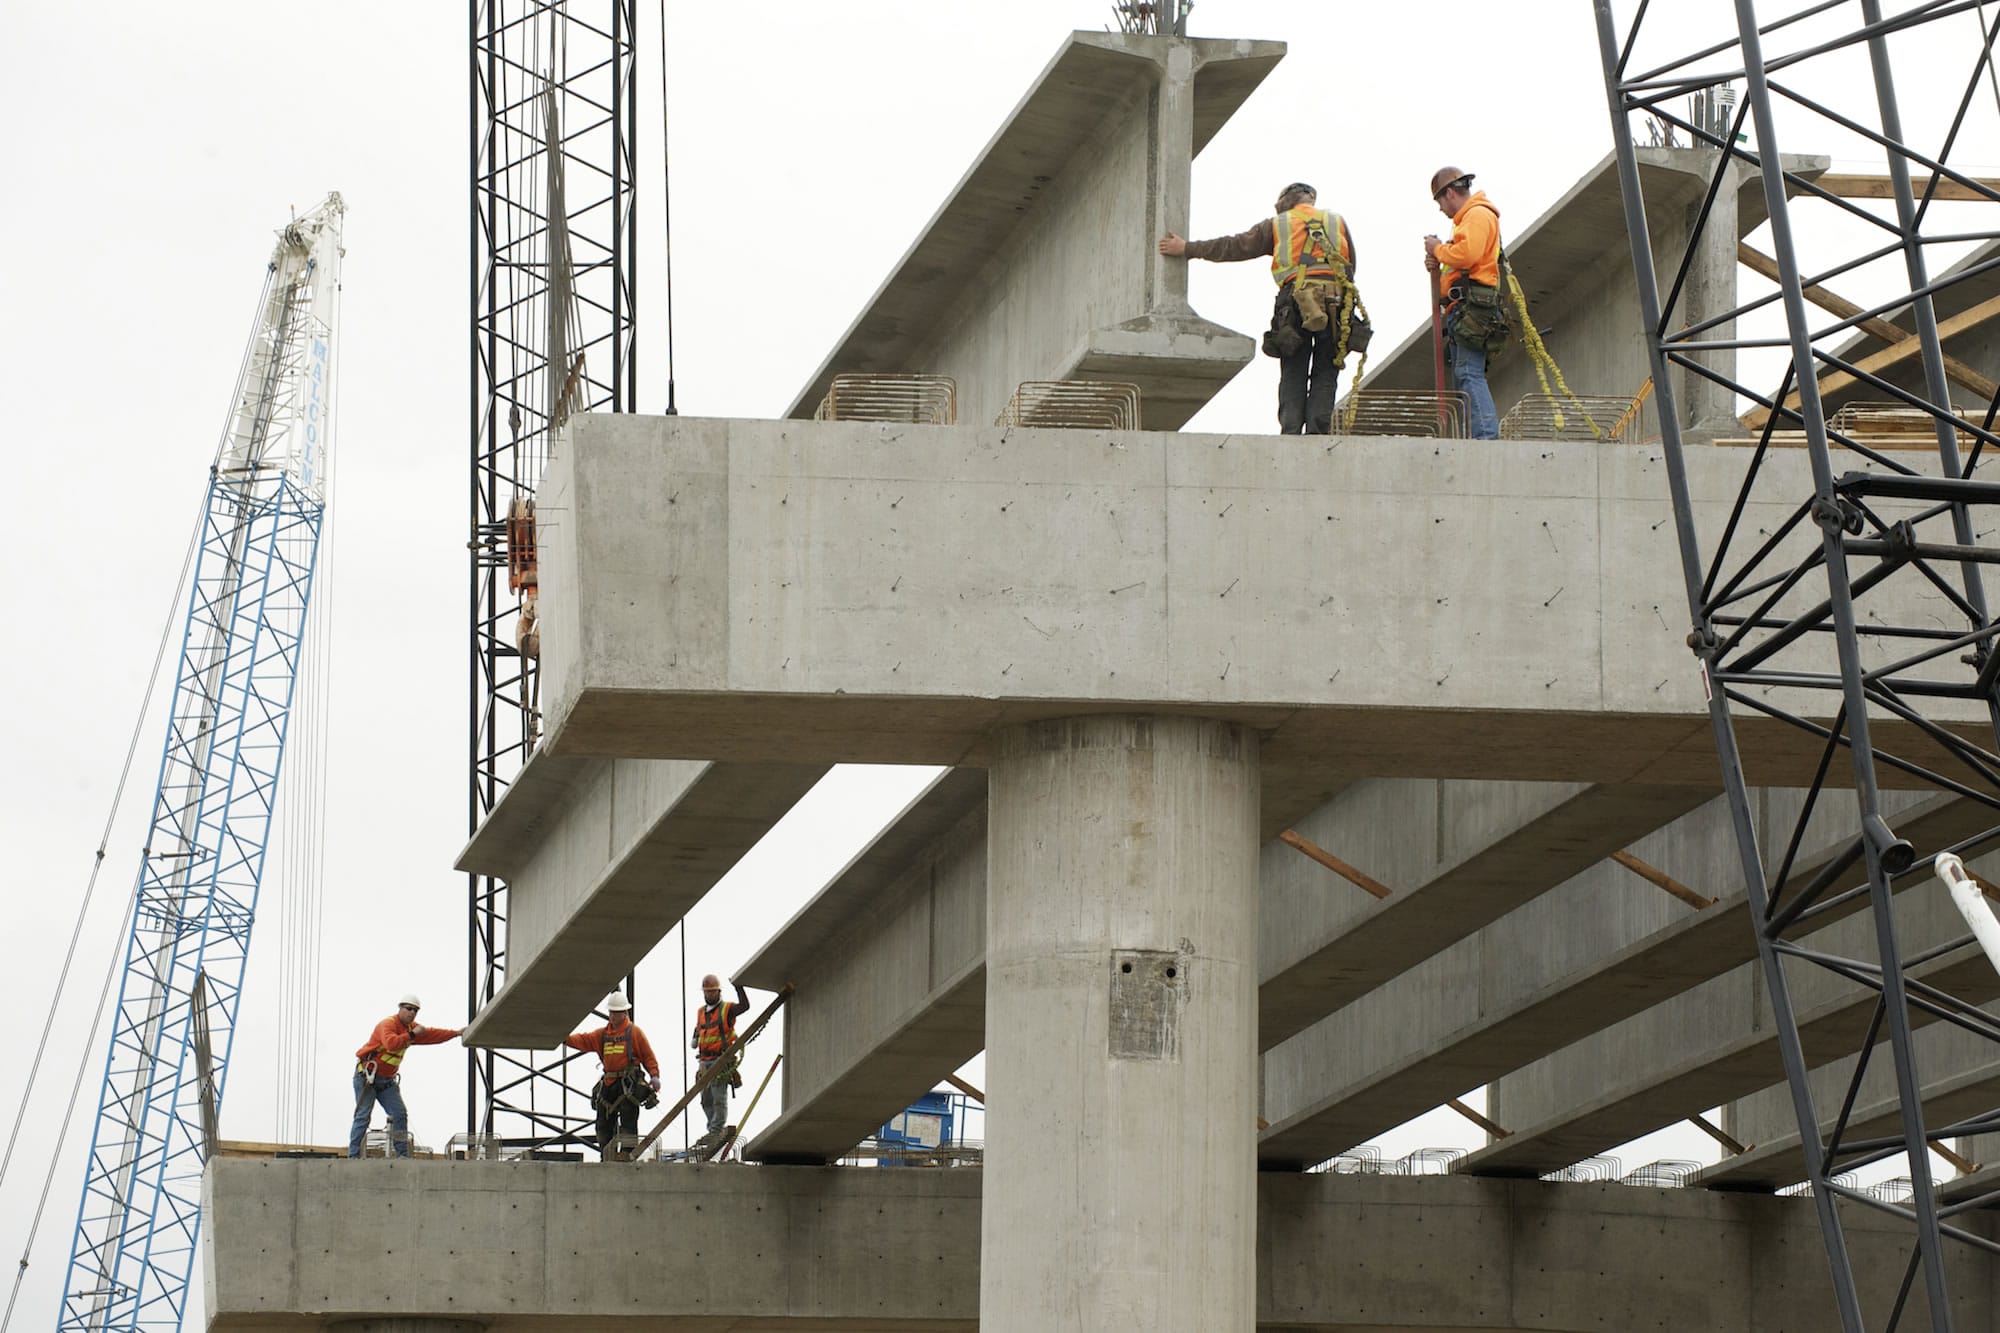 Workers from Max J. Kuney Co. lift a concrete girder onto bridge supports Tuesday as part of the Salmon Creek Interchange Project.